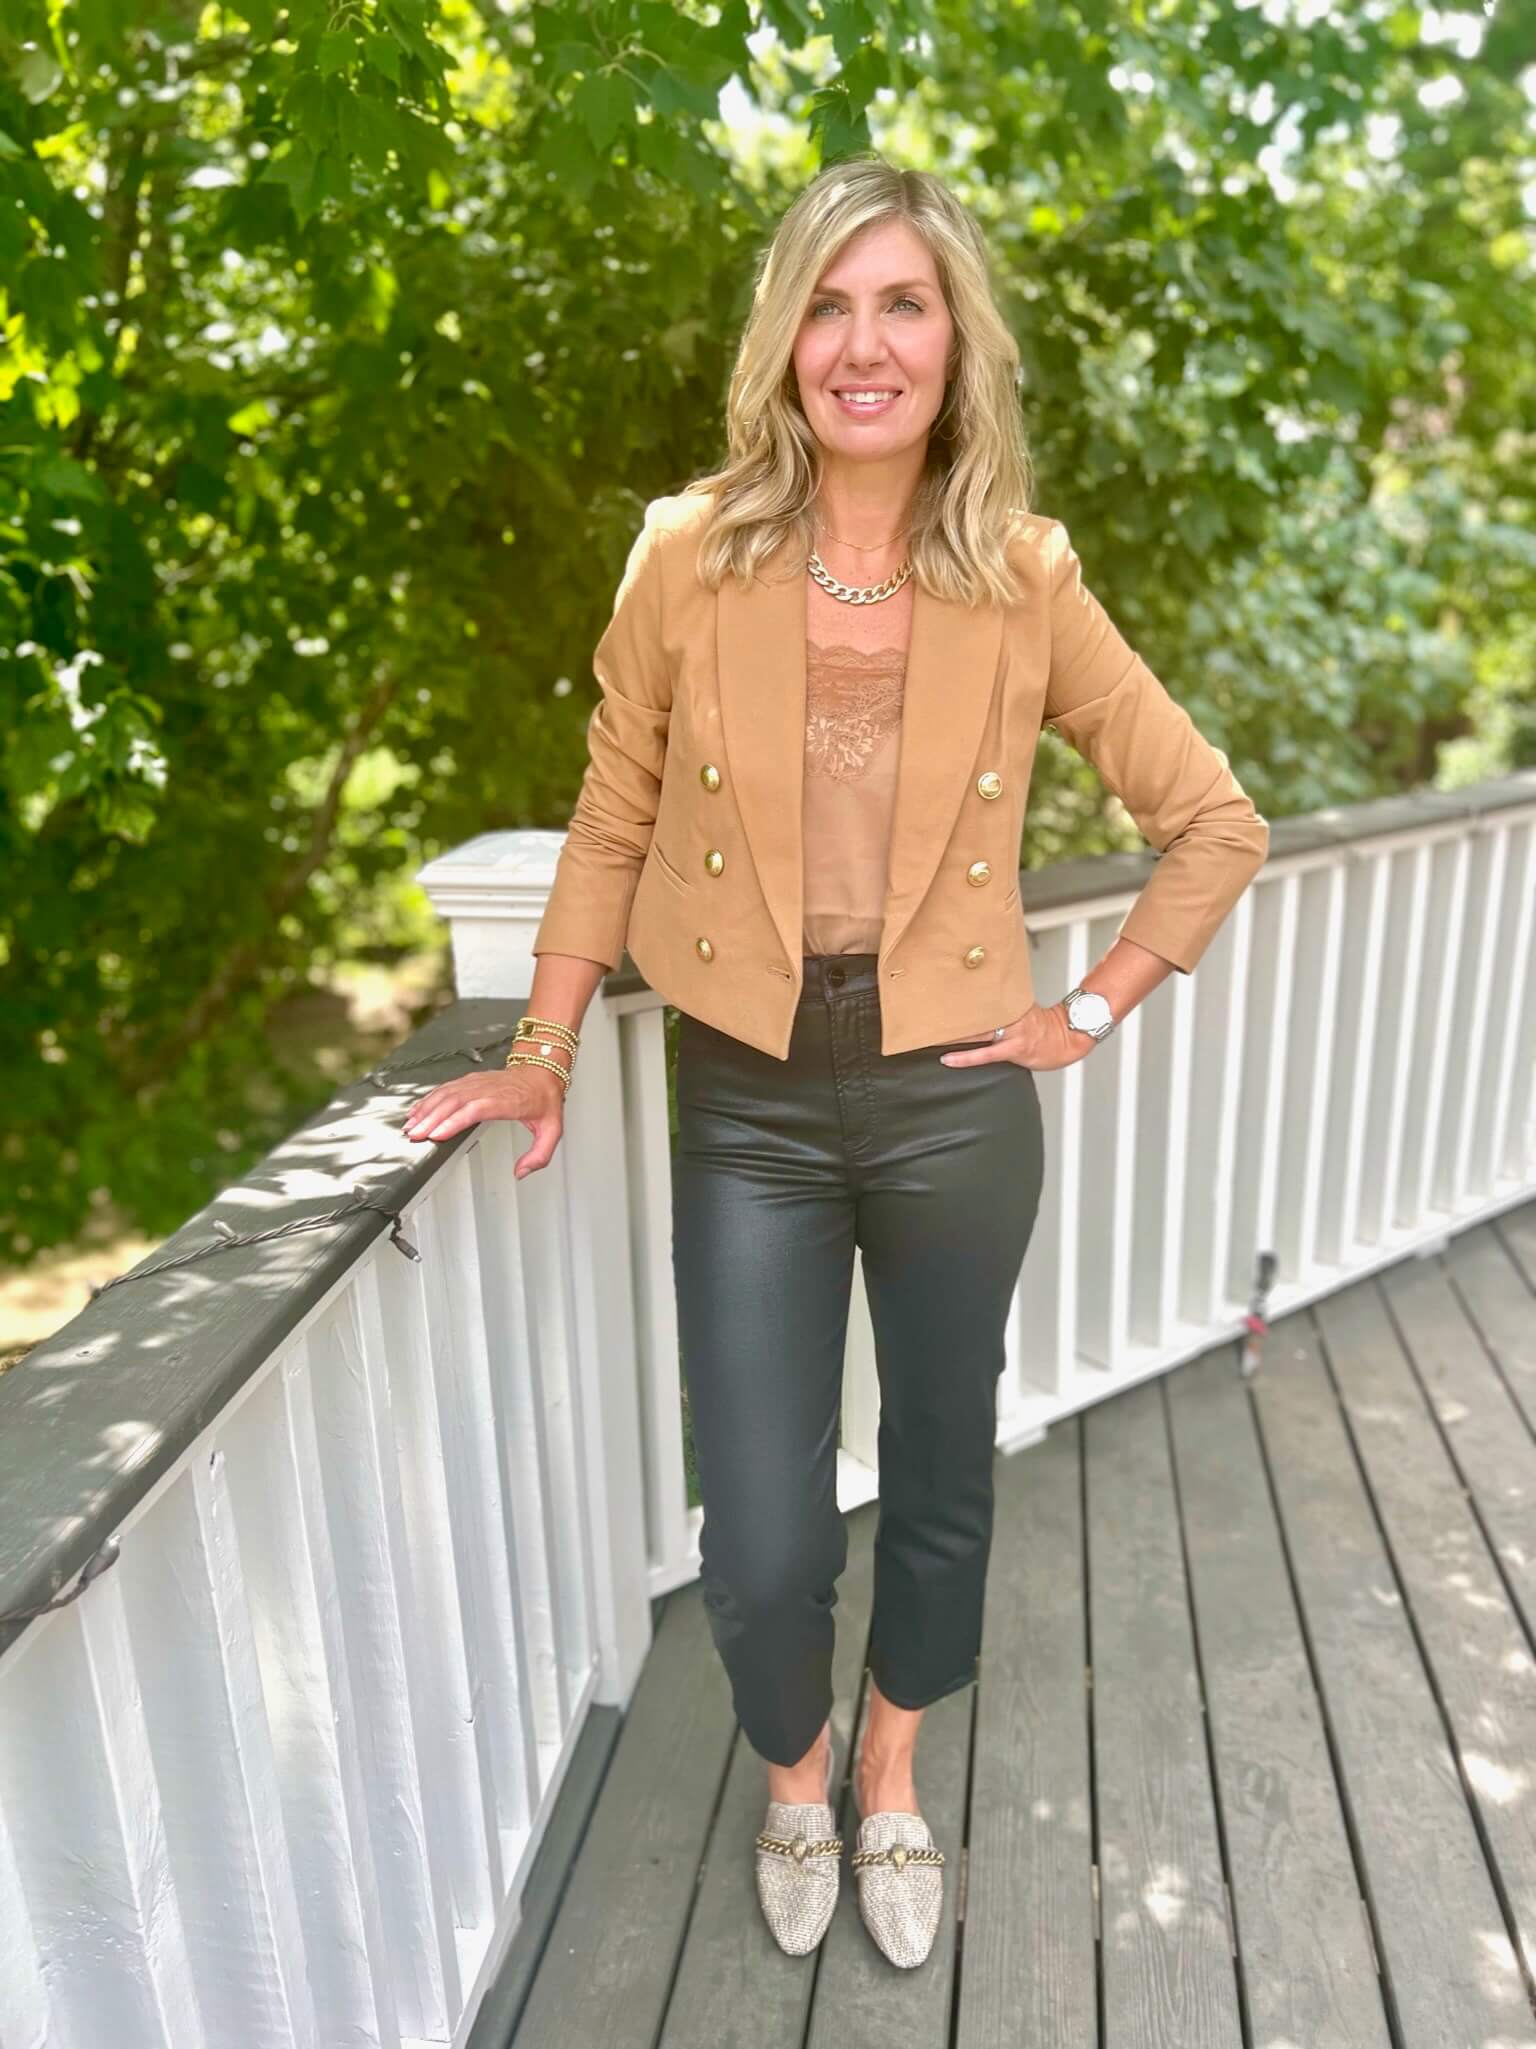 3 Pairs Of Jeans You Need This Season camel blazer and coated jeans nashville stylists share style inspiration for coated jeans personal stylists share style inspiration for blazers how to wear flats with a blazer